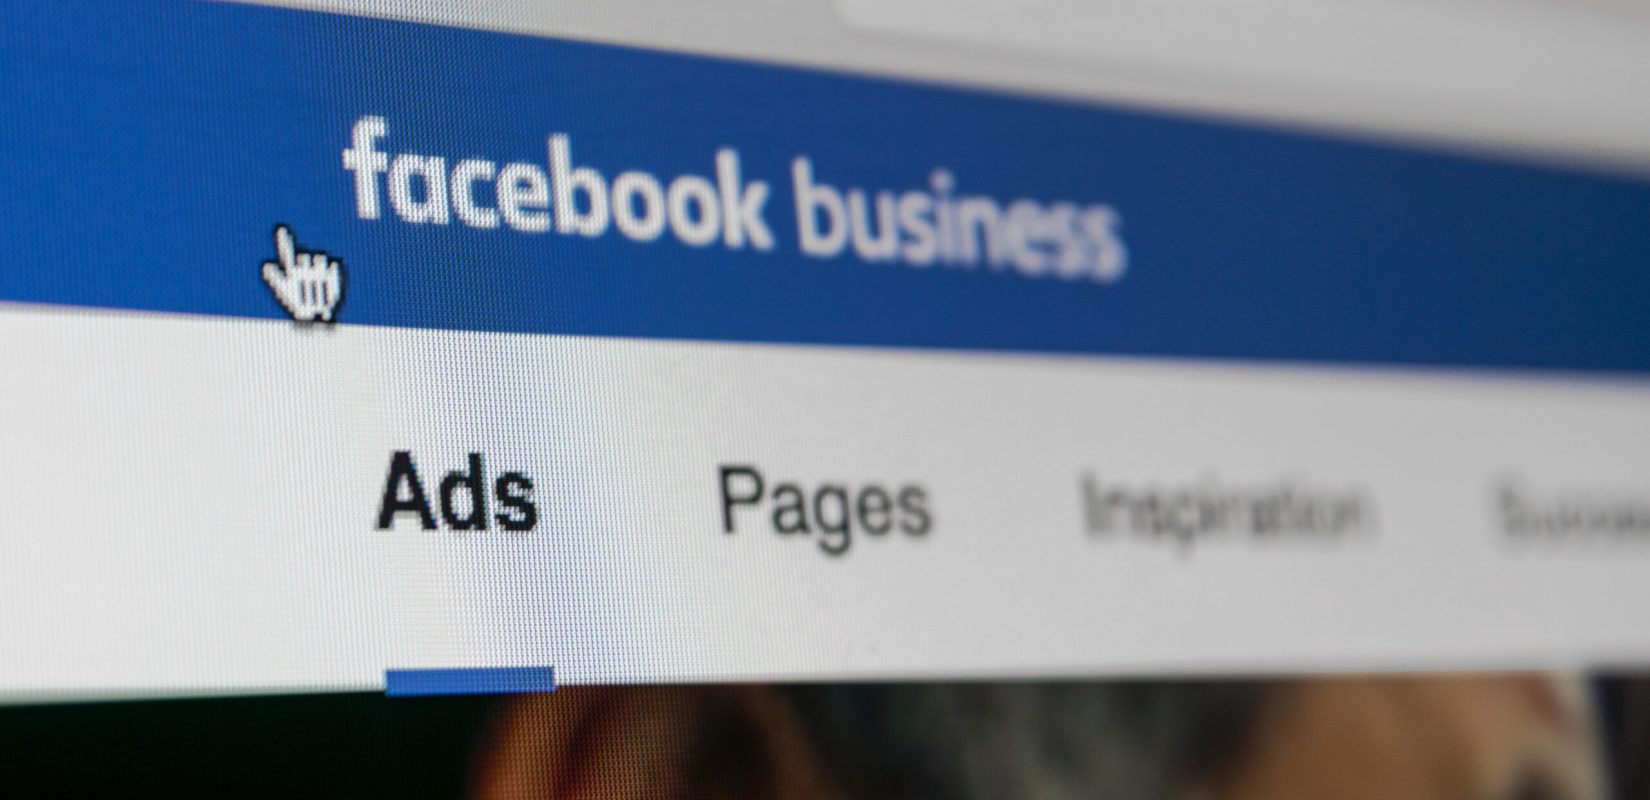 Business sets up a page on Facebook in order to better interact and engage with customers.